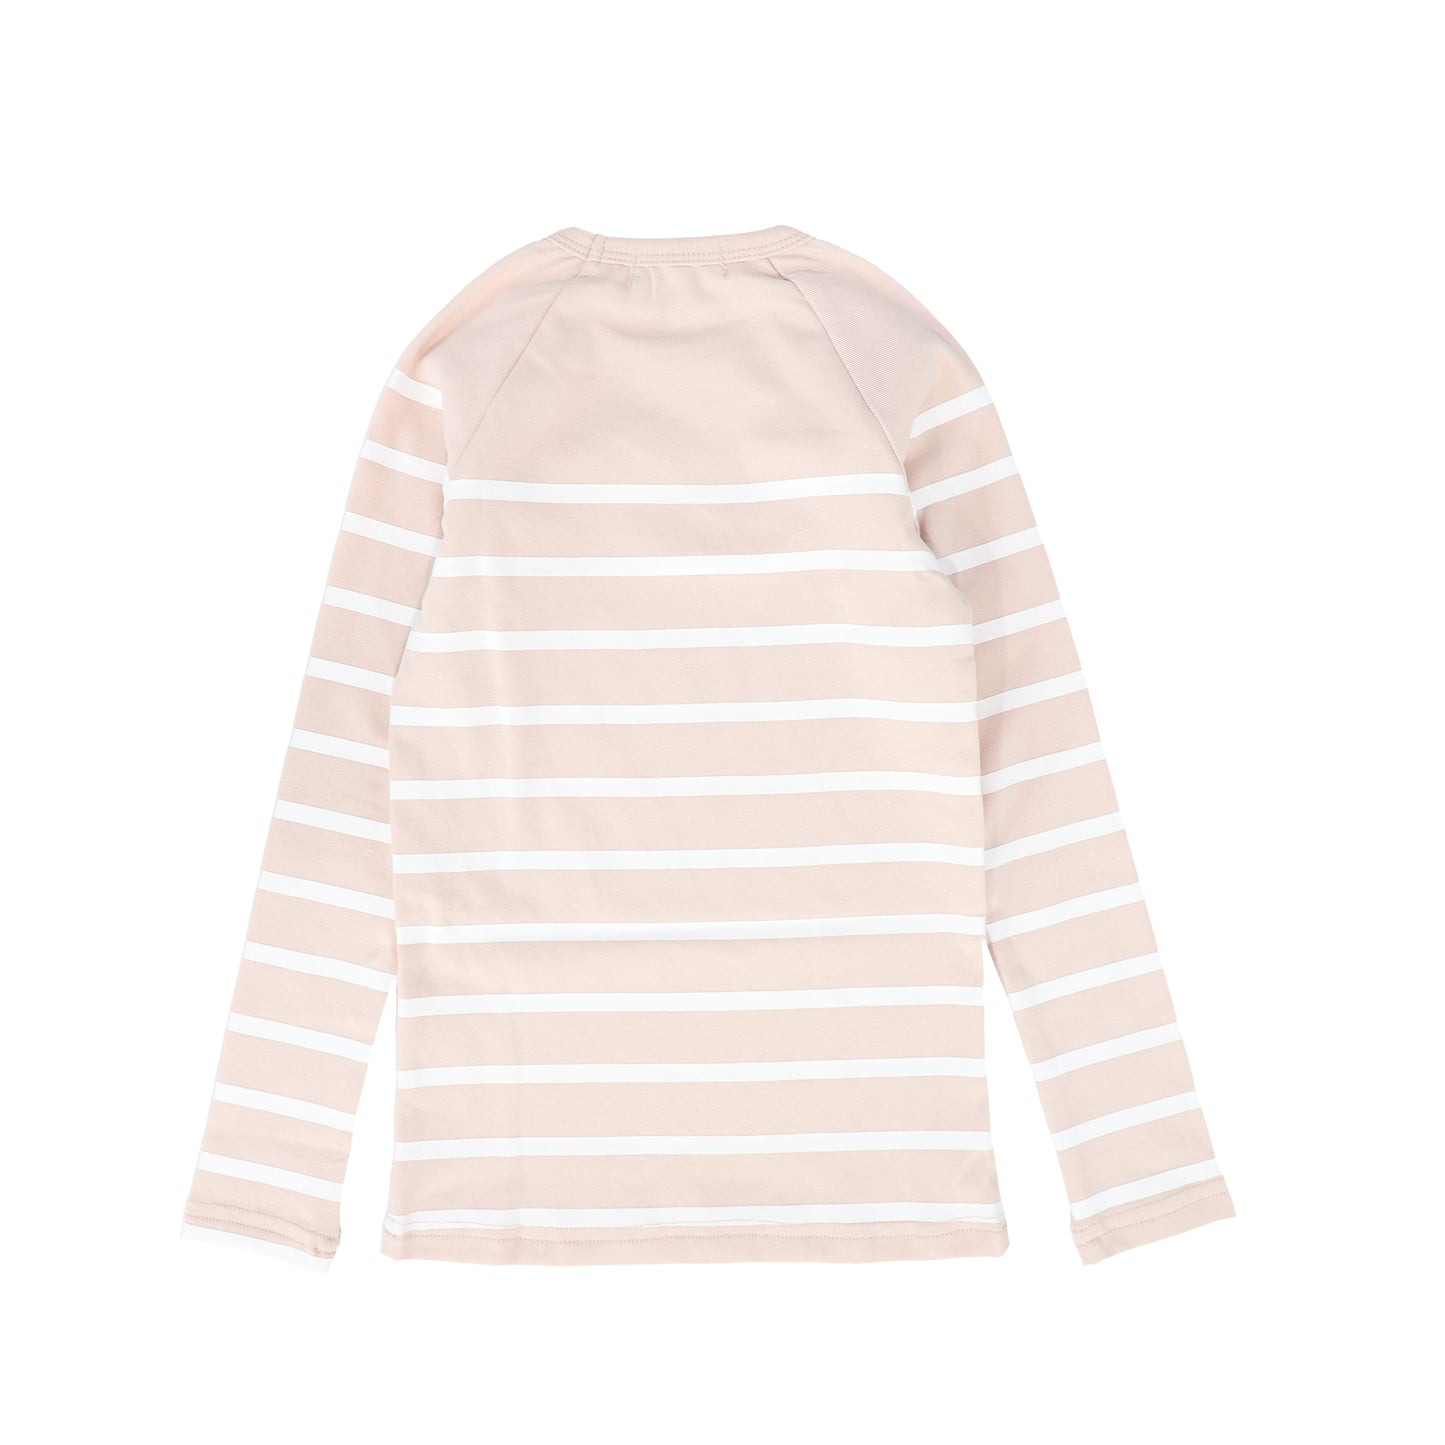 BAMBOO PINK STRIPED LS TEE [FINAL SALE]